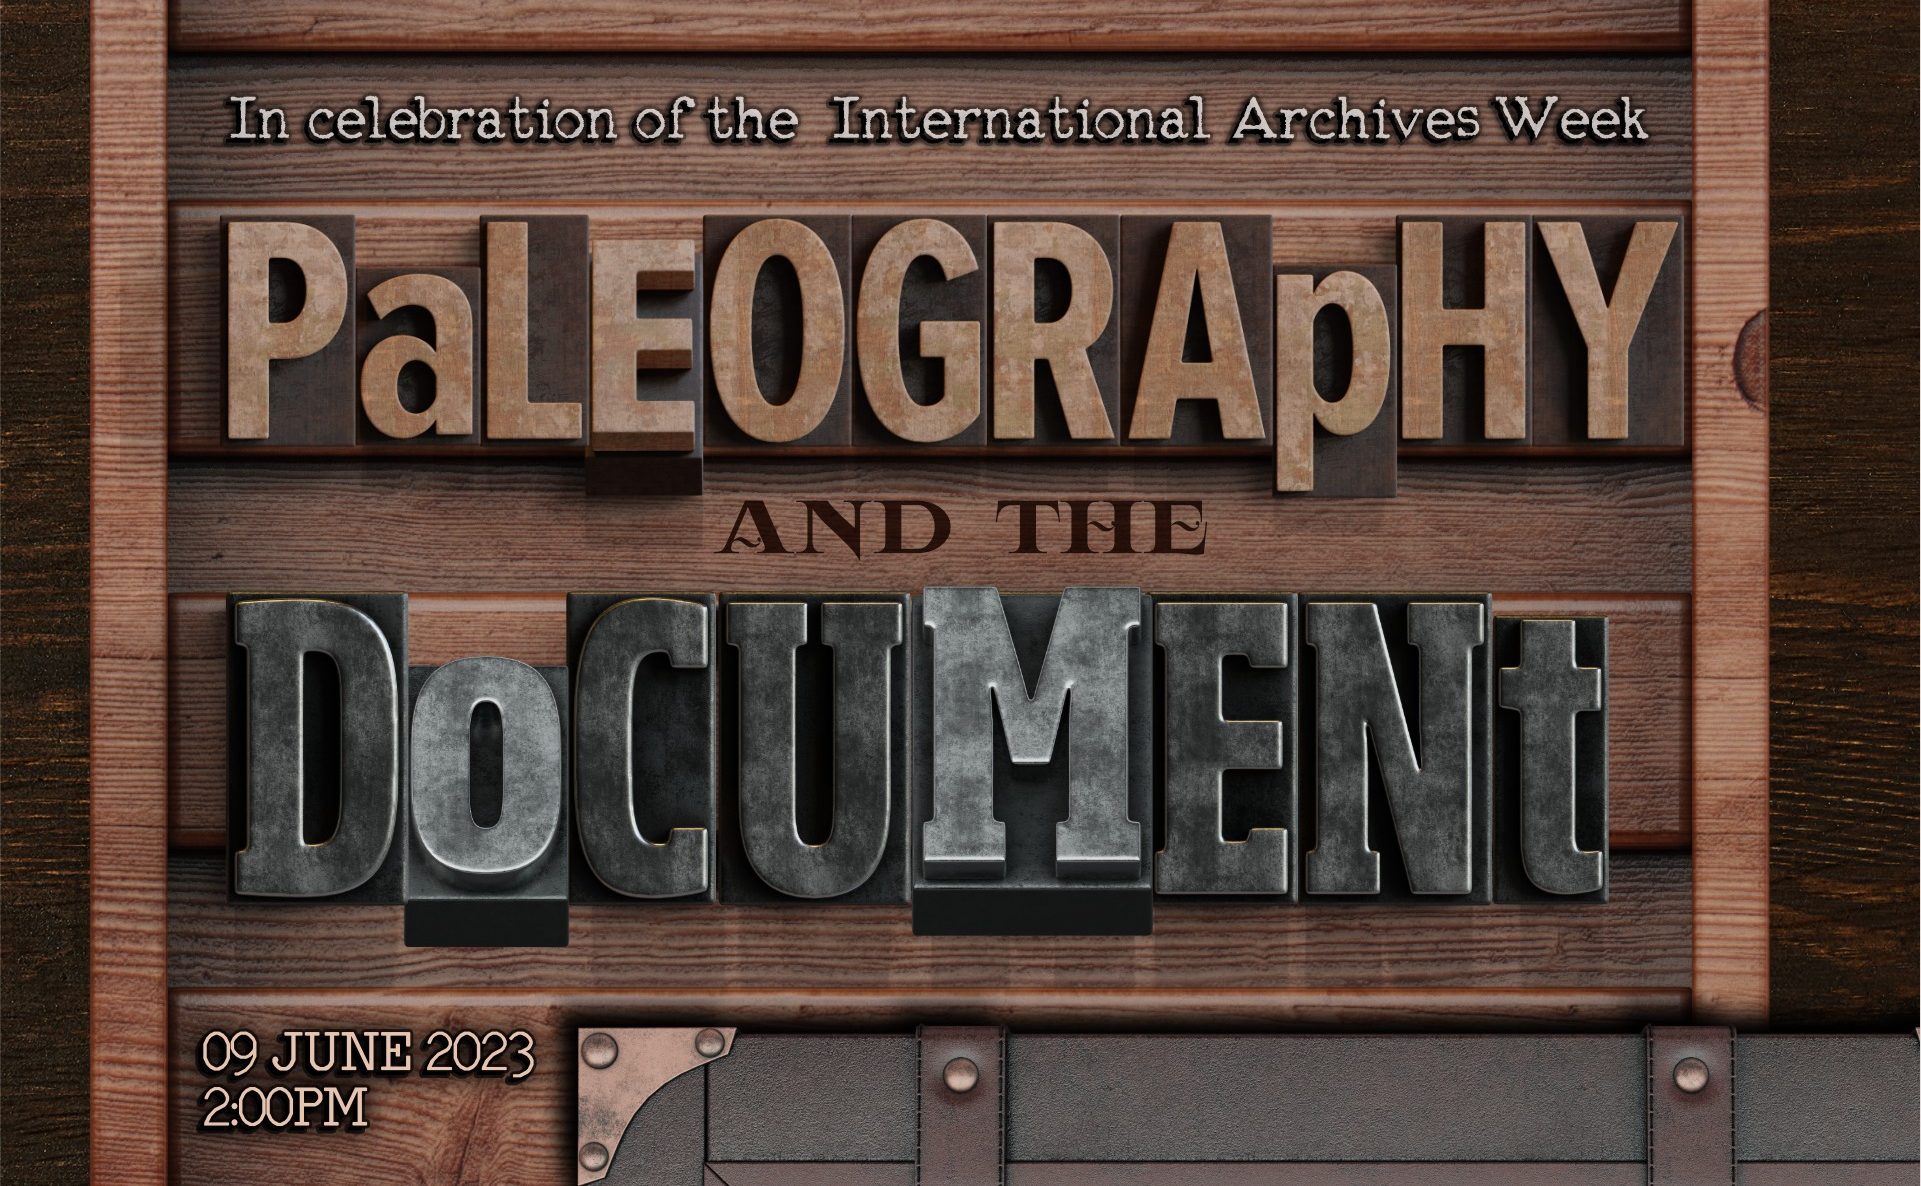 Paleography and the Document